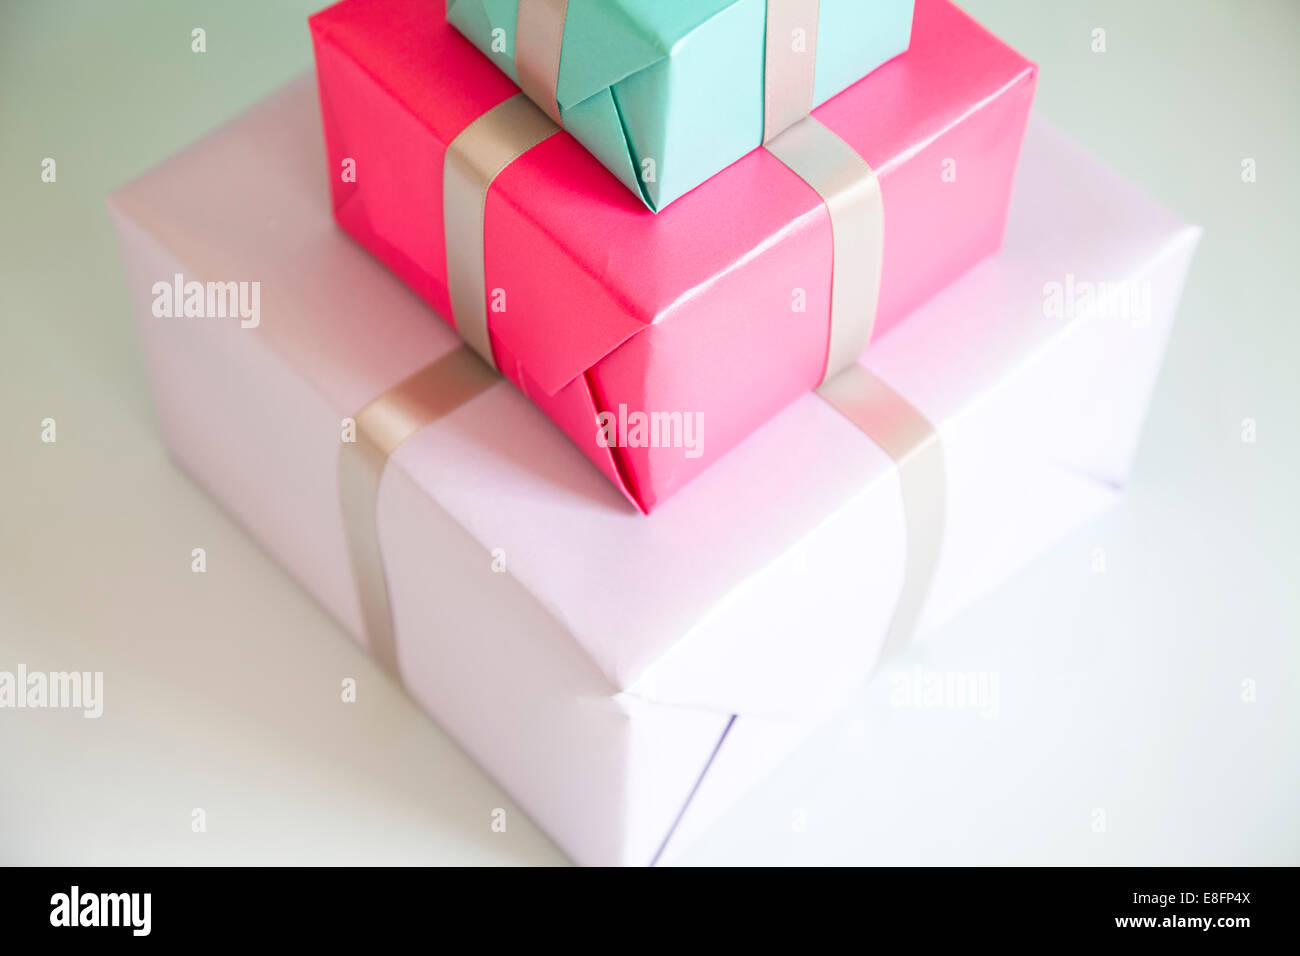 Stack of three wrapped gifts Stock Photo